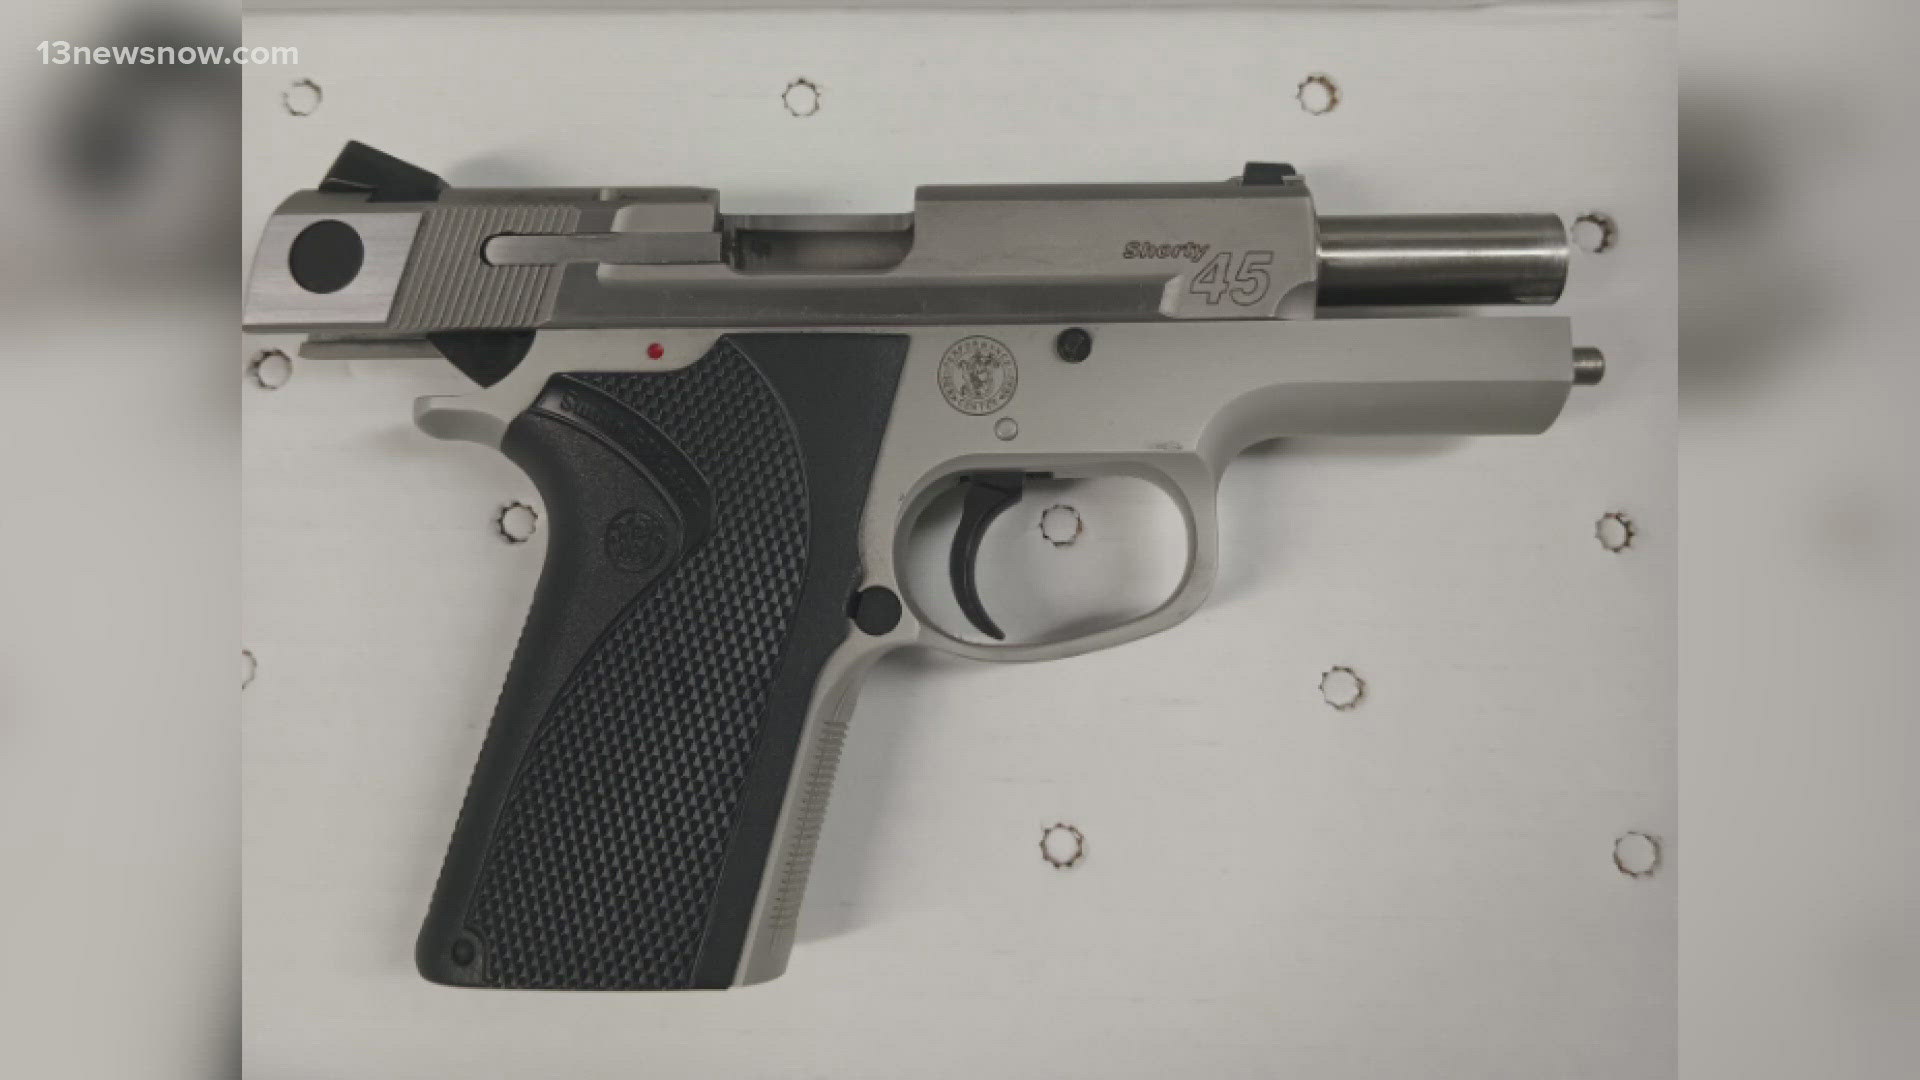 A Virginia Beach man was cited for trying to bring a loaded gun through airport security.